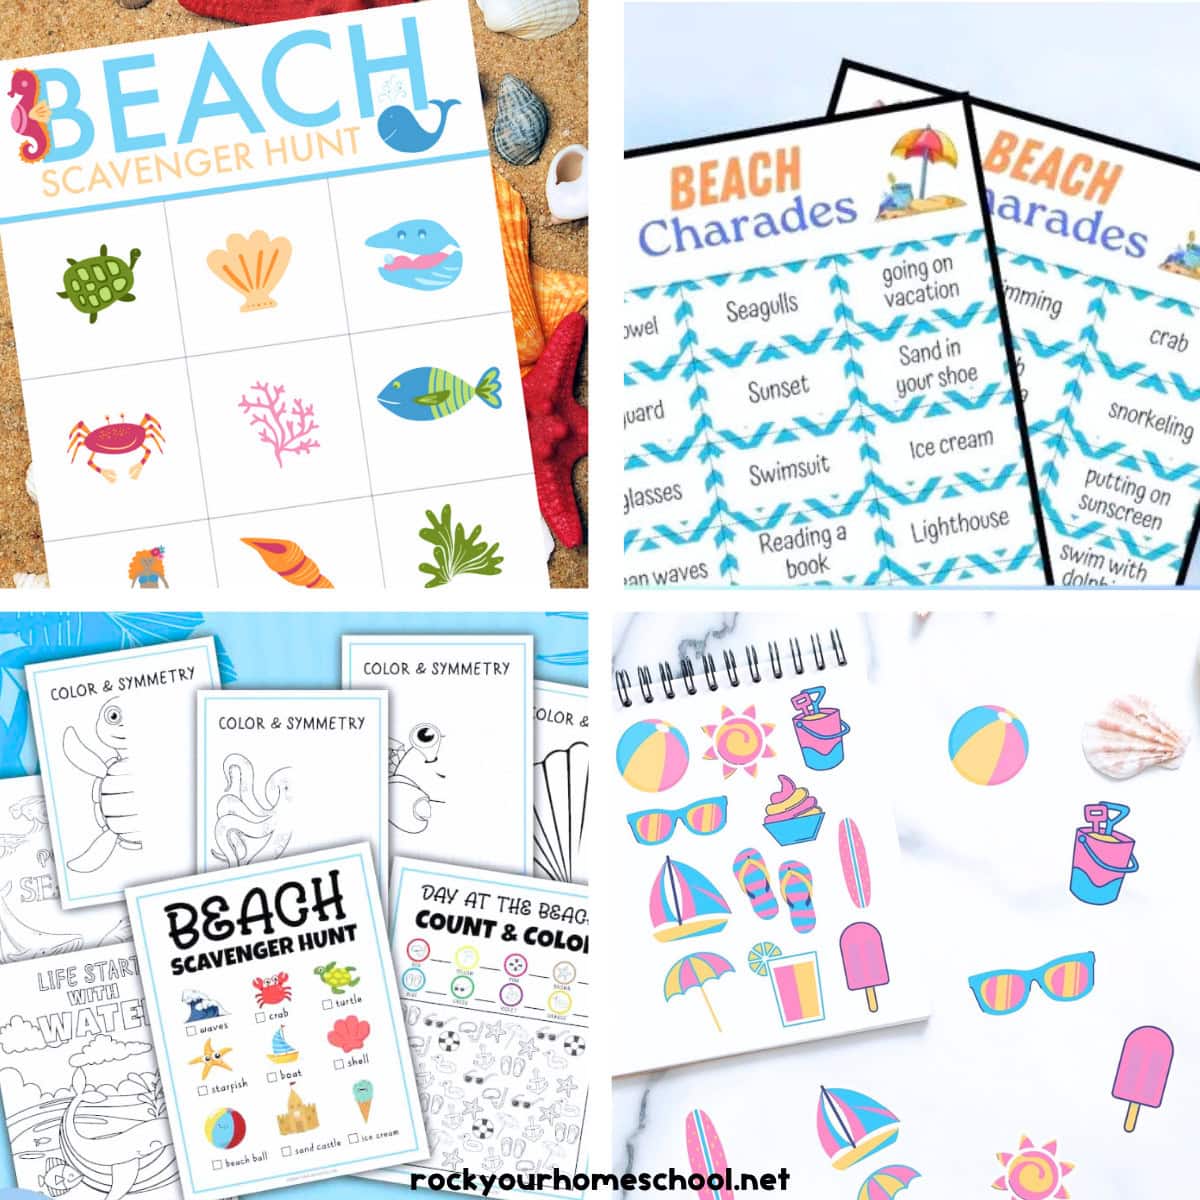 Four examples of free beach printables with scavenger hunt, charades, activities pack, and stickers.